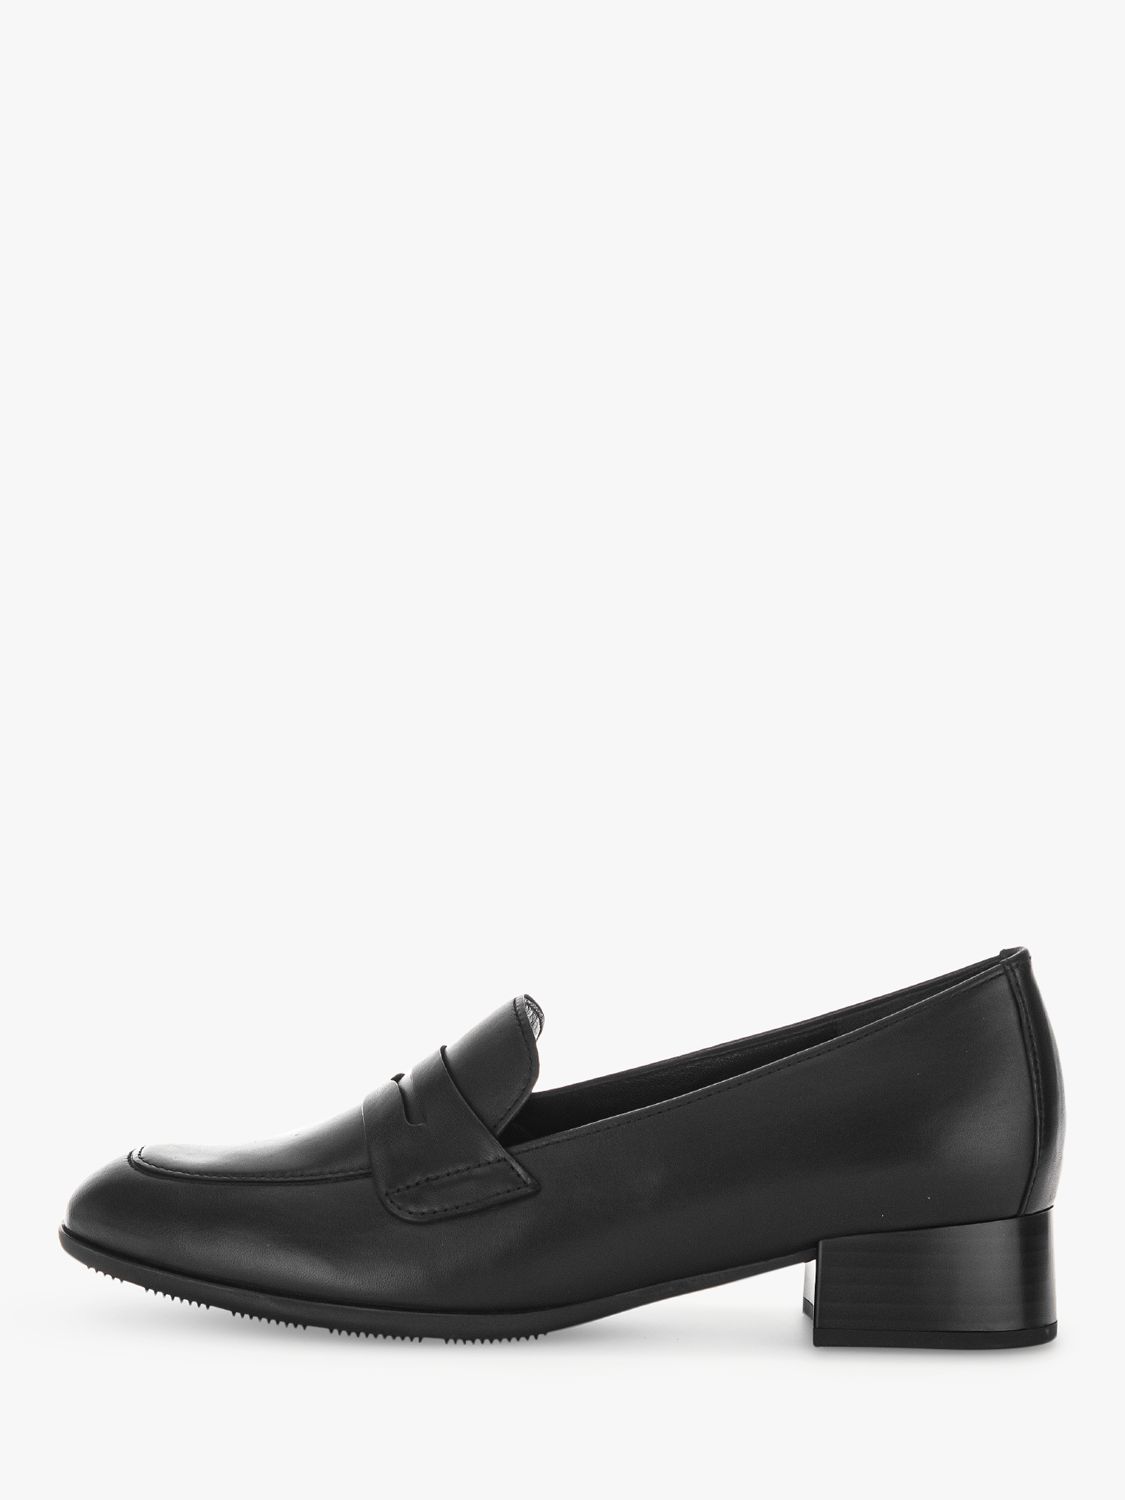 Gabor Right Leather Loafers, Black